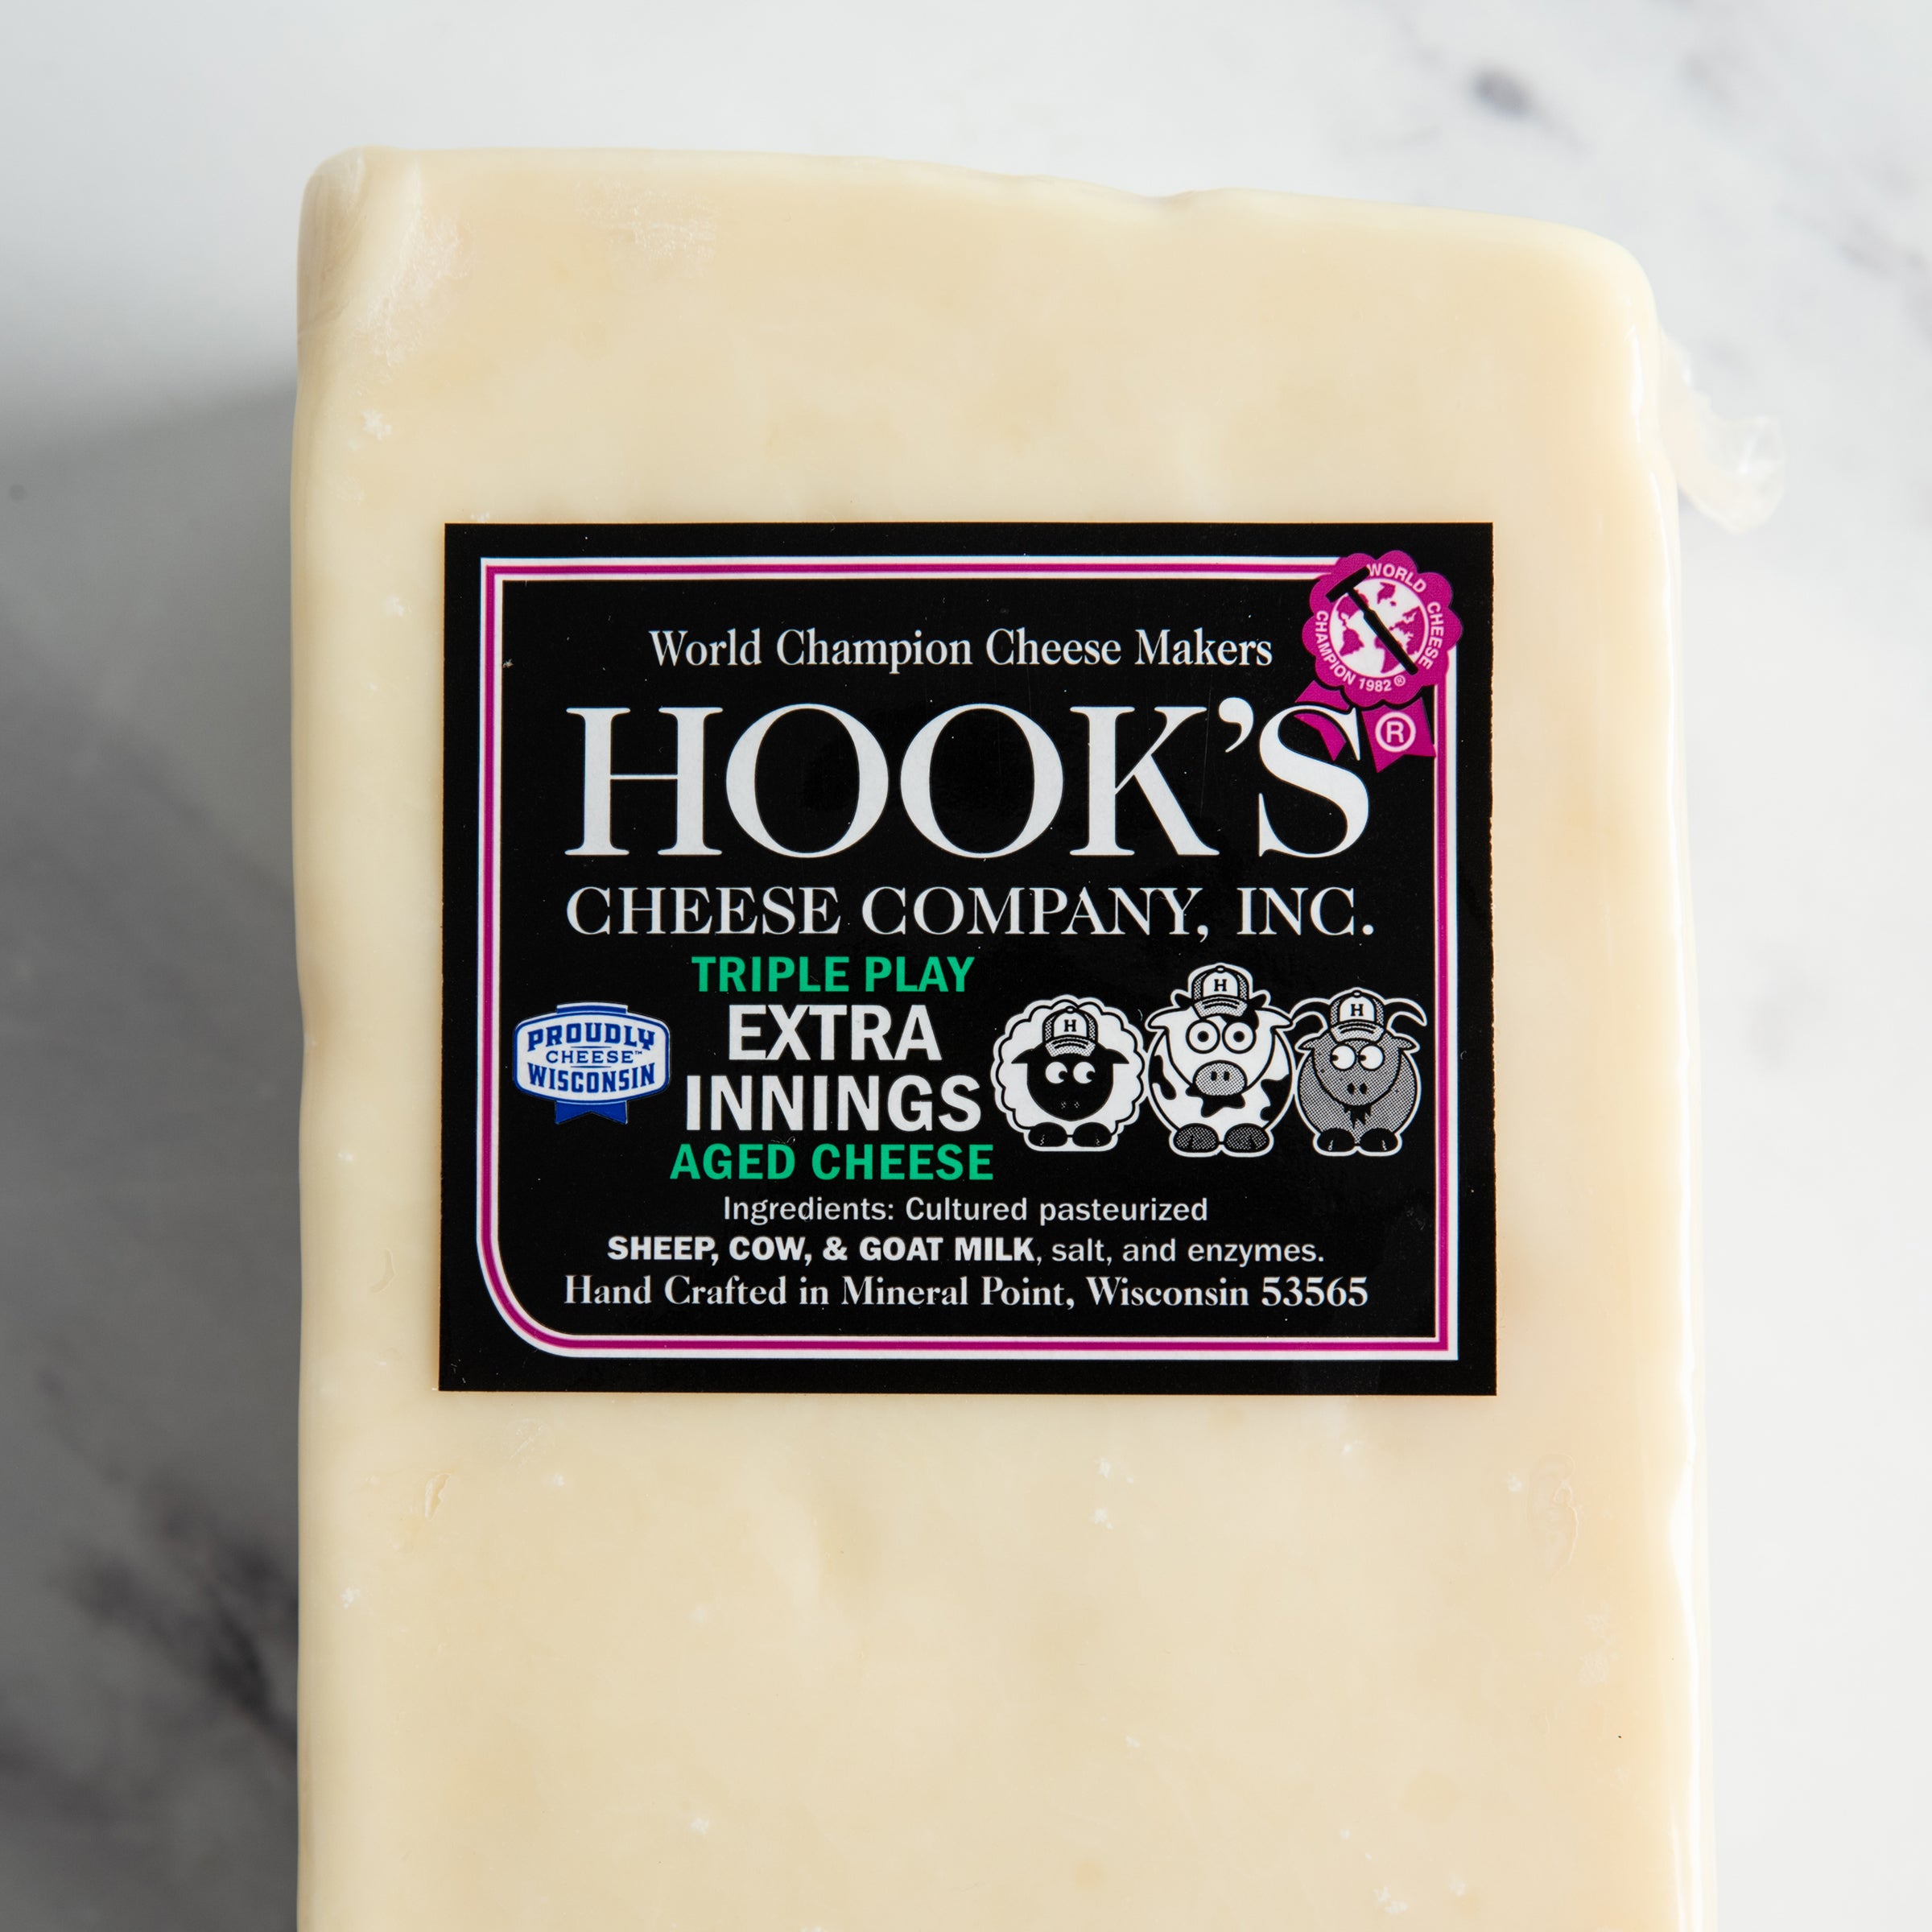 Hook’s Triple Play Extra Innings Aged Cheese